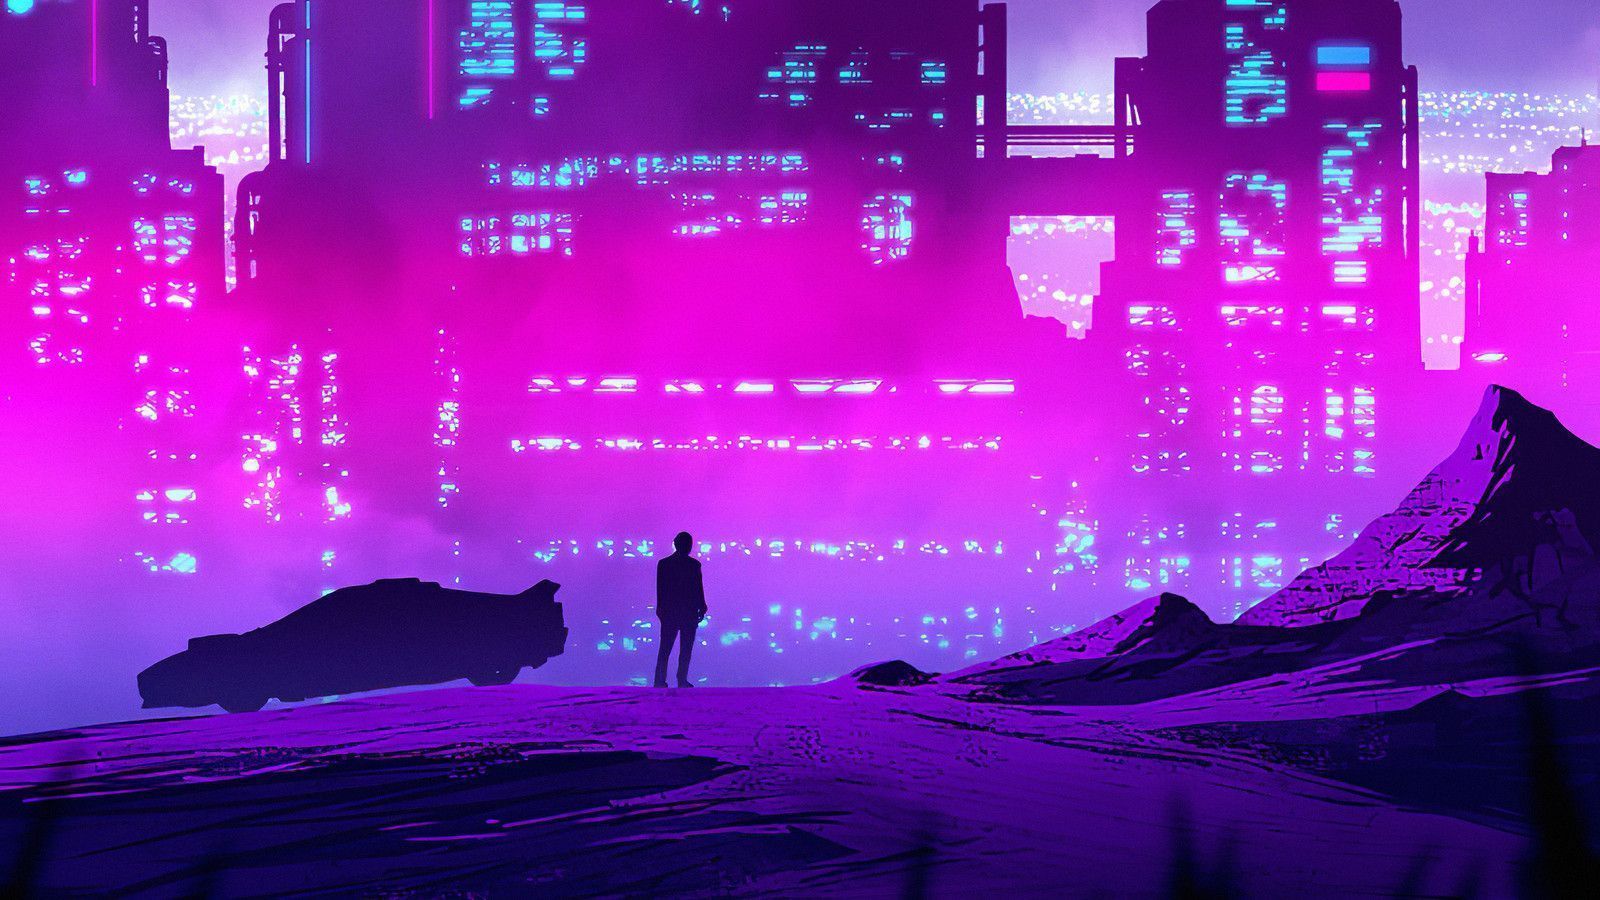 A person standing on a hill looking at a city lit up at night - City, synthwave, gaming